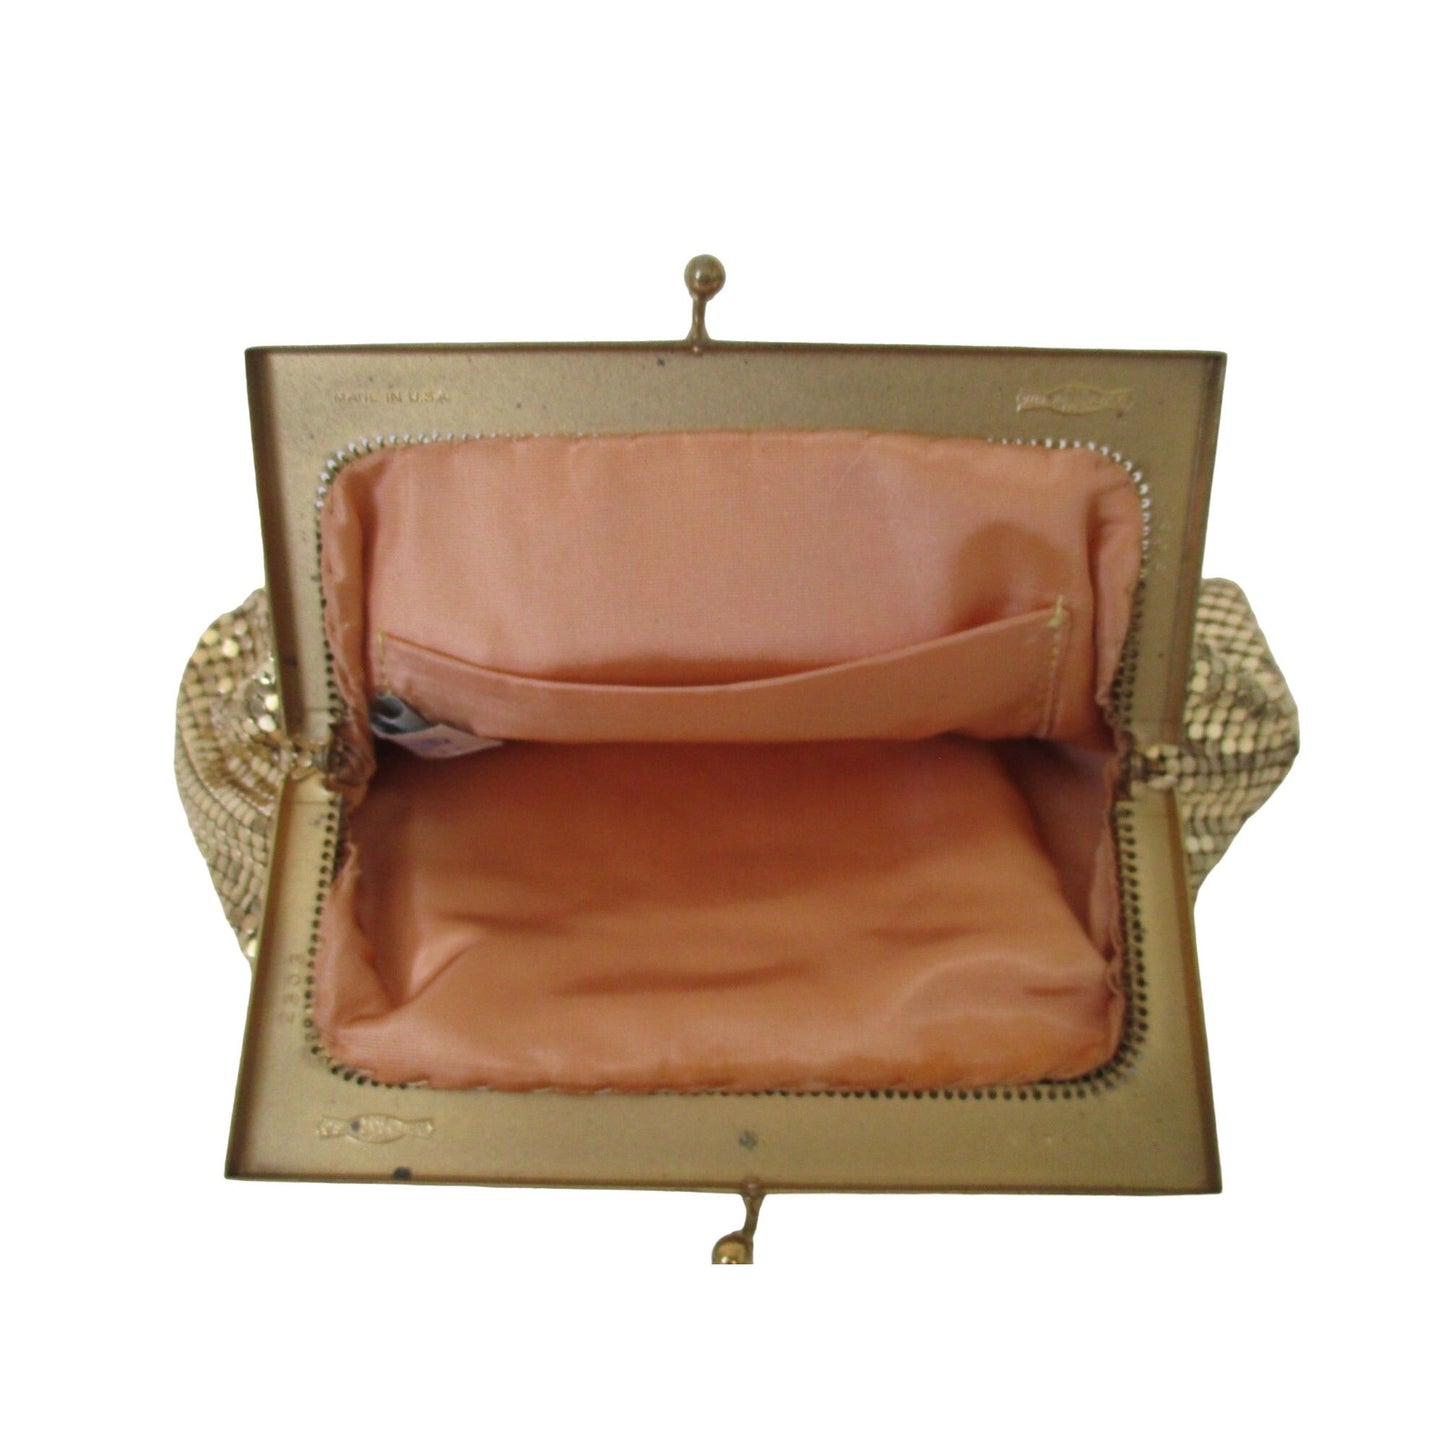 Mint Condition, Whiting and Davis, gold mirrored mesh, Art Deco, evening bag with a kiss closure & mother of pearl & rhinestone accents